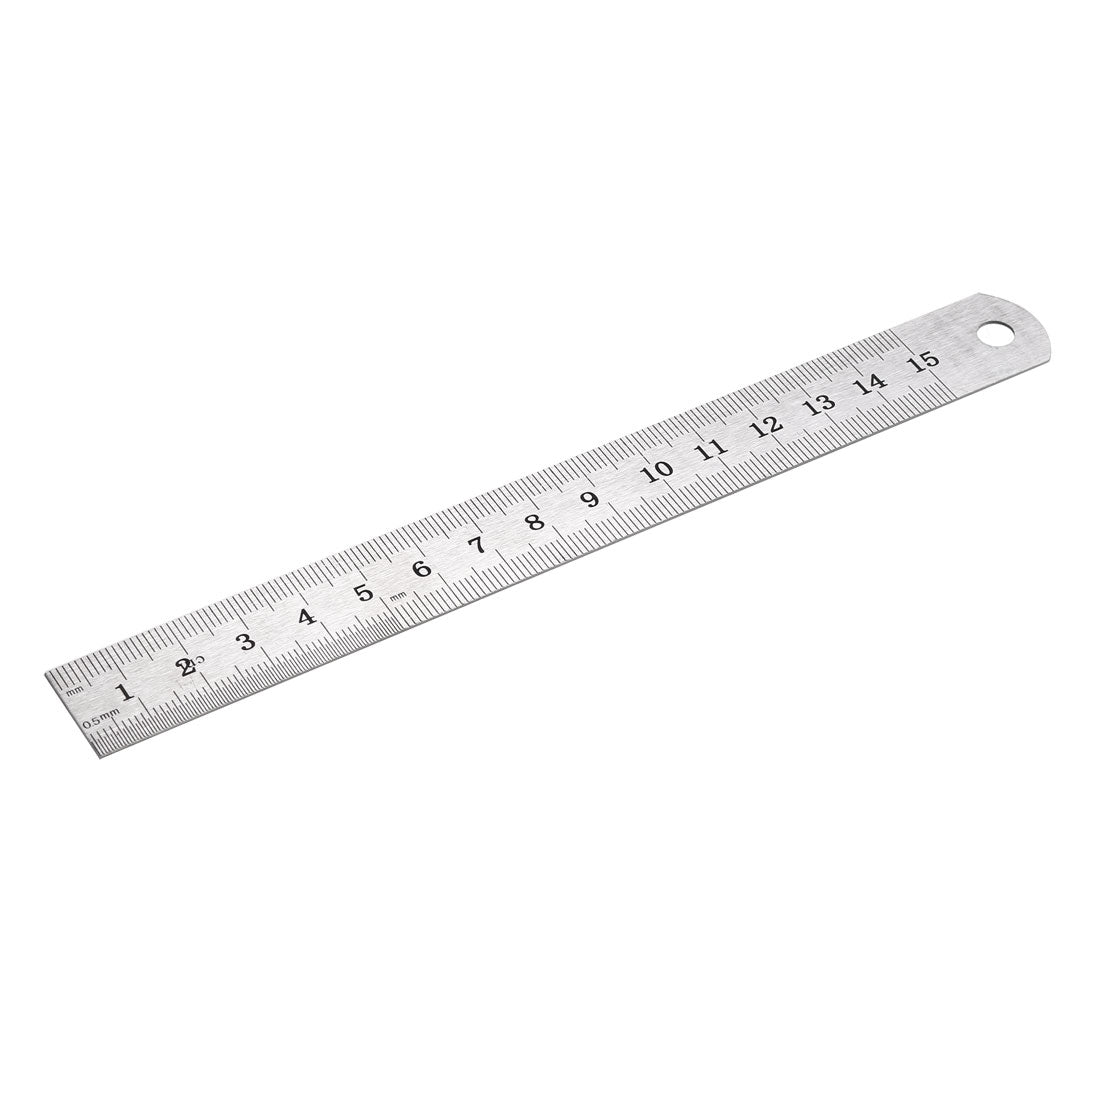 uxcell Uxcell Stainless Steel Ruler 6-inch (15cm) Straight Ruler Inches and Metric Scale